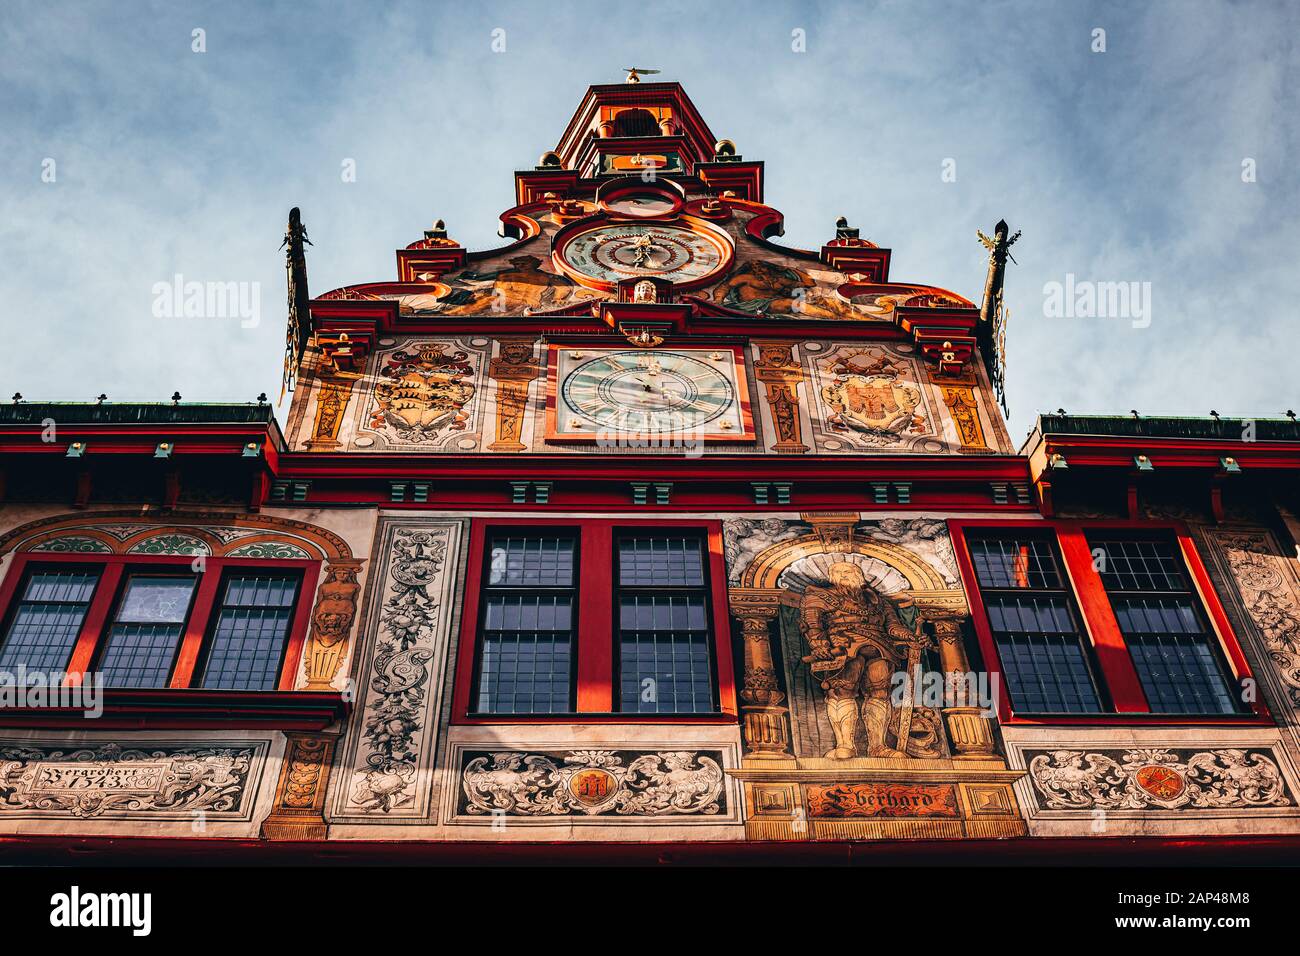 Tuebingen, Germany - December 2019: Old and beautiful city hall of tübingen in Germany with a clock and frescos at the facade. Magnificent view from b Stock Photo